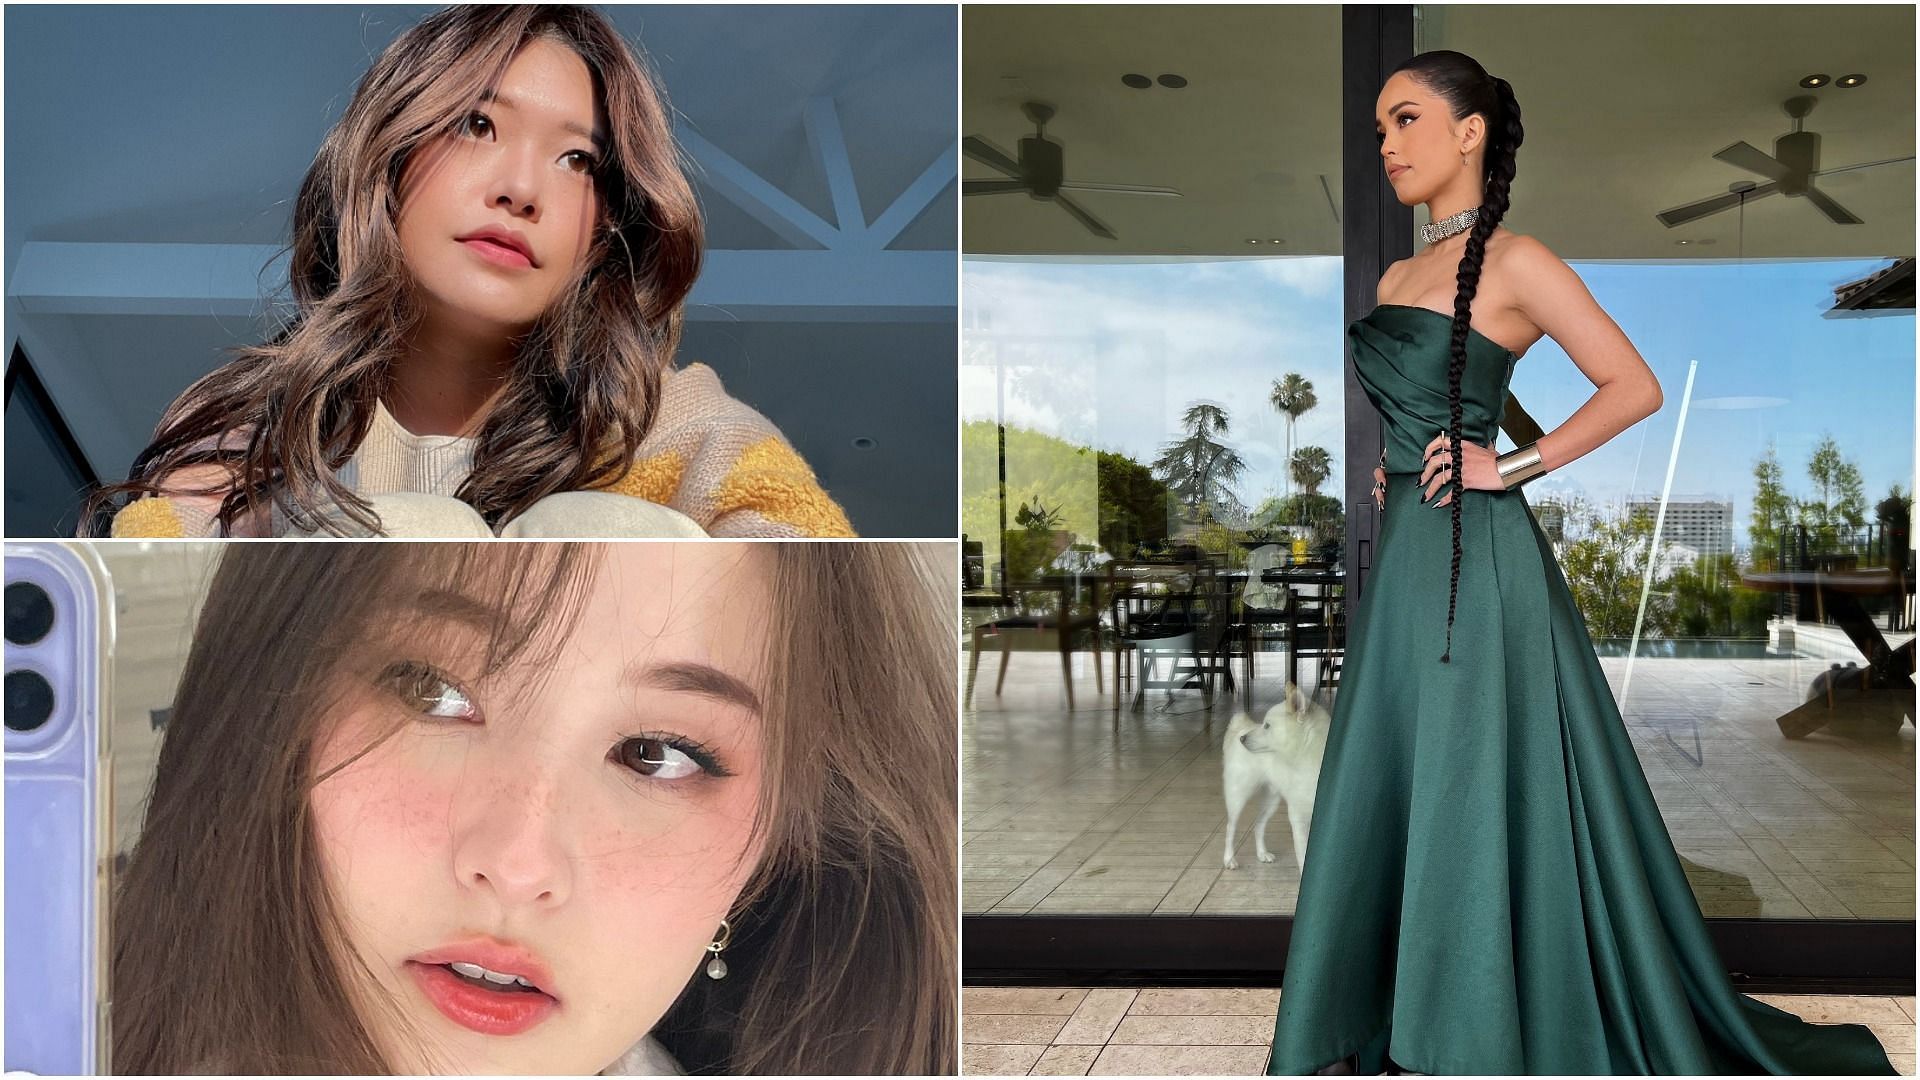 Streamers and fans of Valkyrae react to her dress for the Gold Gala (Images via Miyoung, TinaKitten, and Valkyrae Twitter)